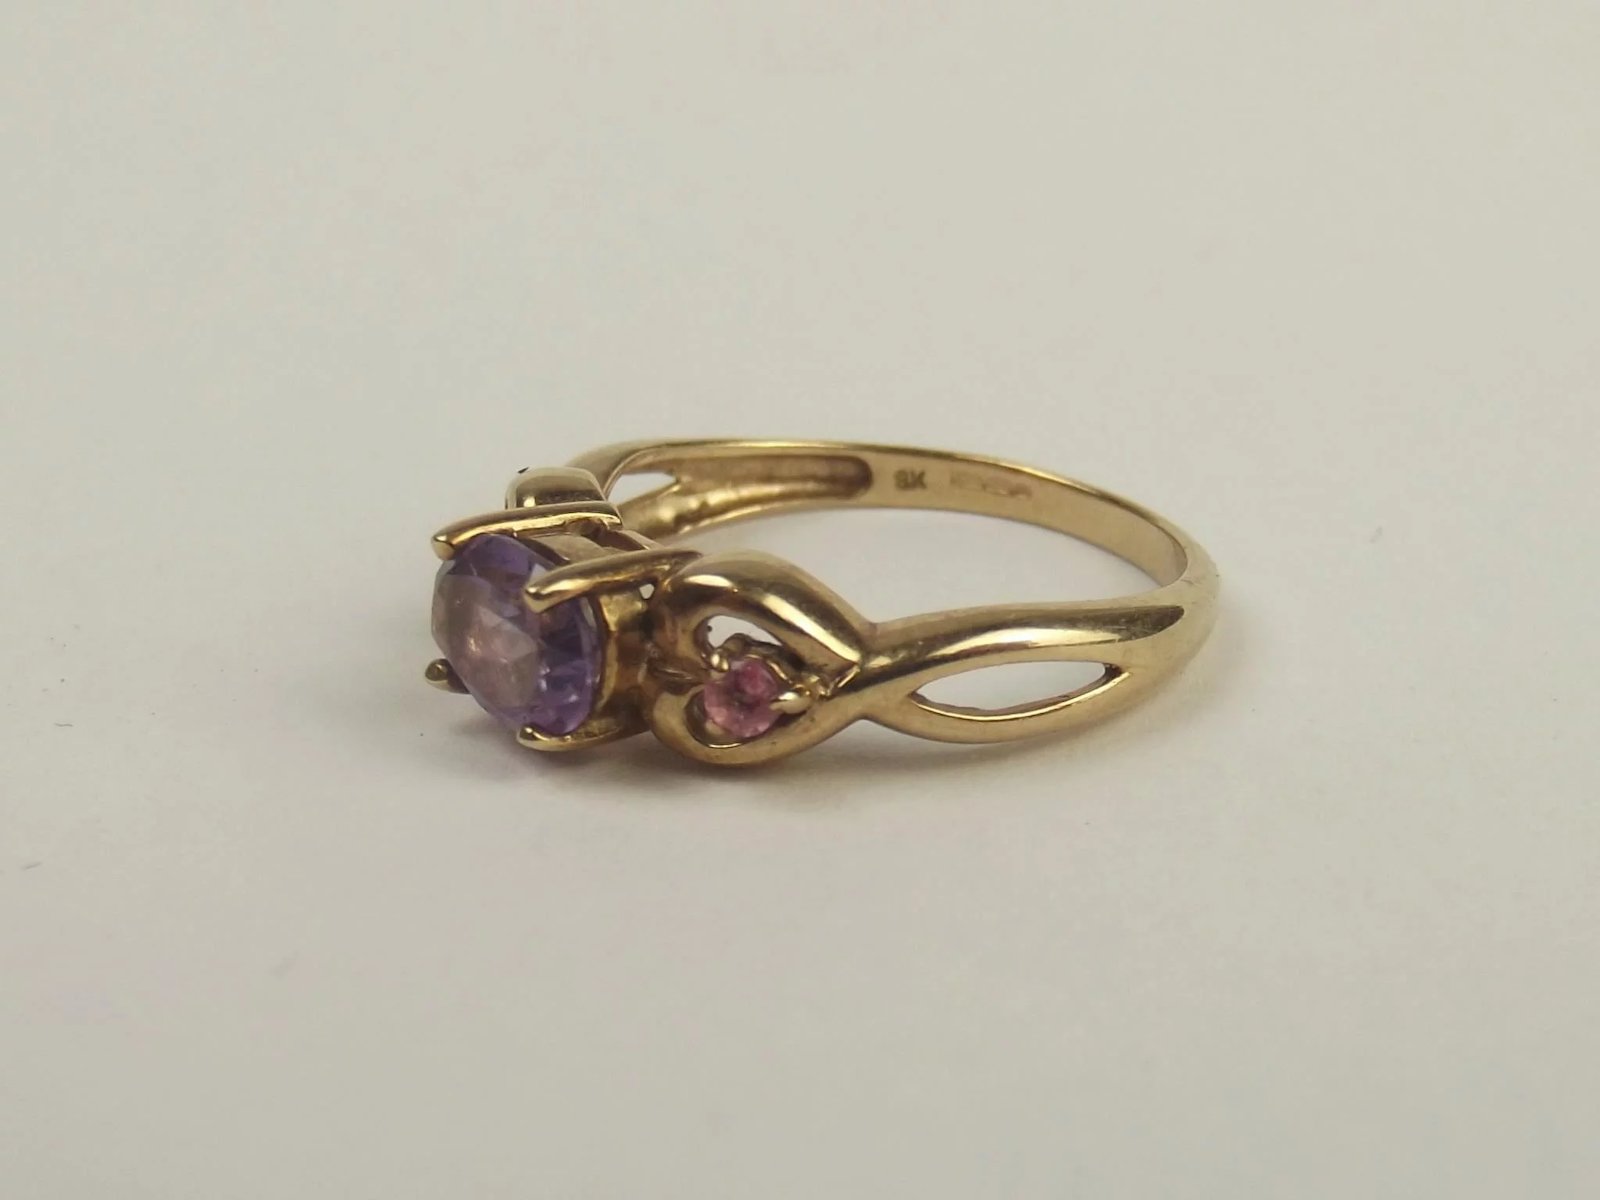 9ct Yellow Gold Amethyst and Tourmaline Ring UK Size N US 6 ½ - Sally ...